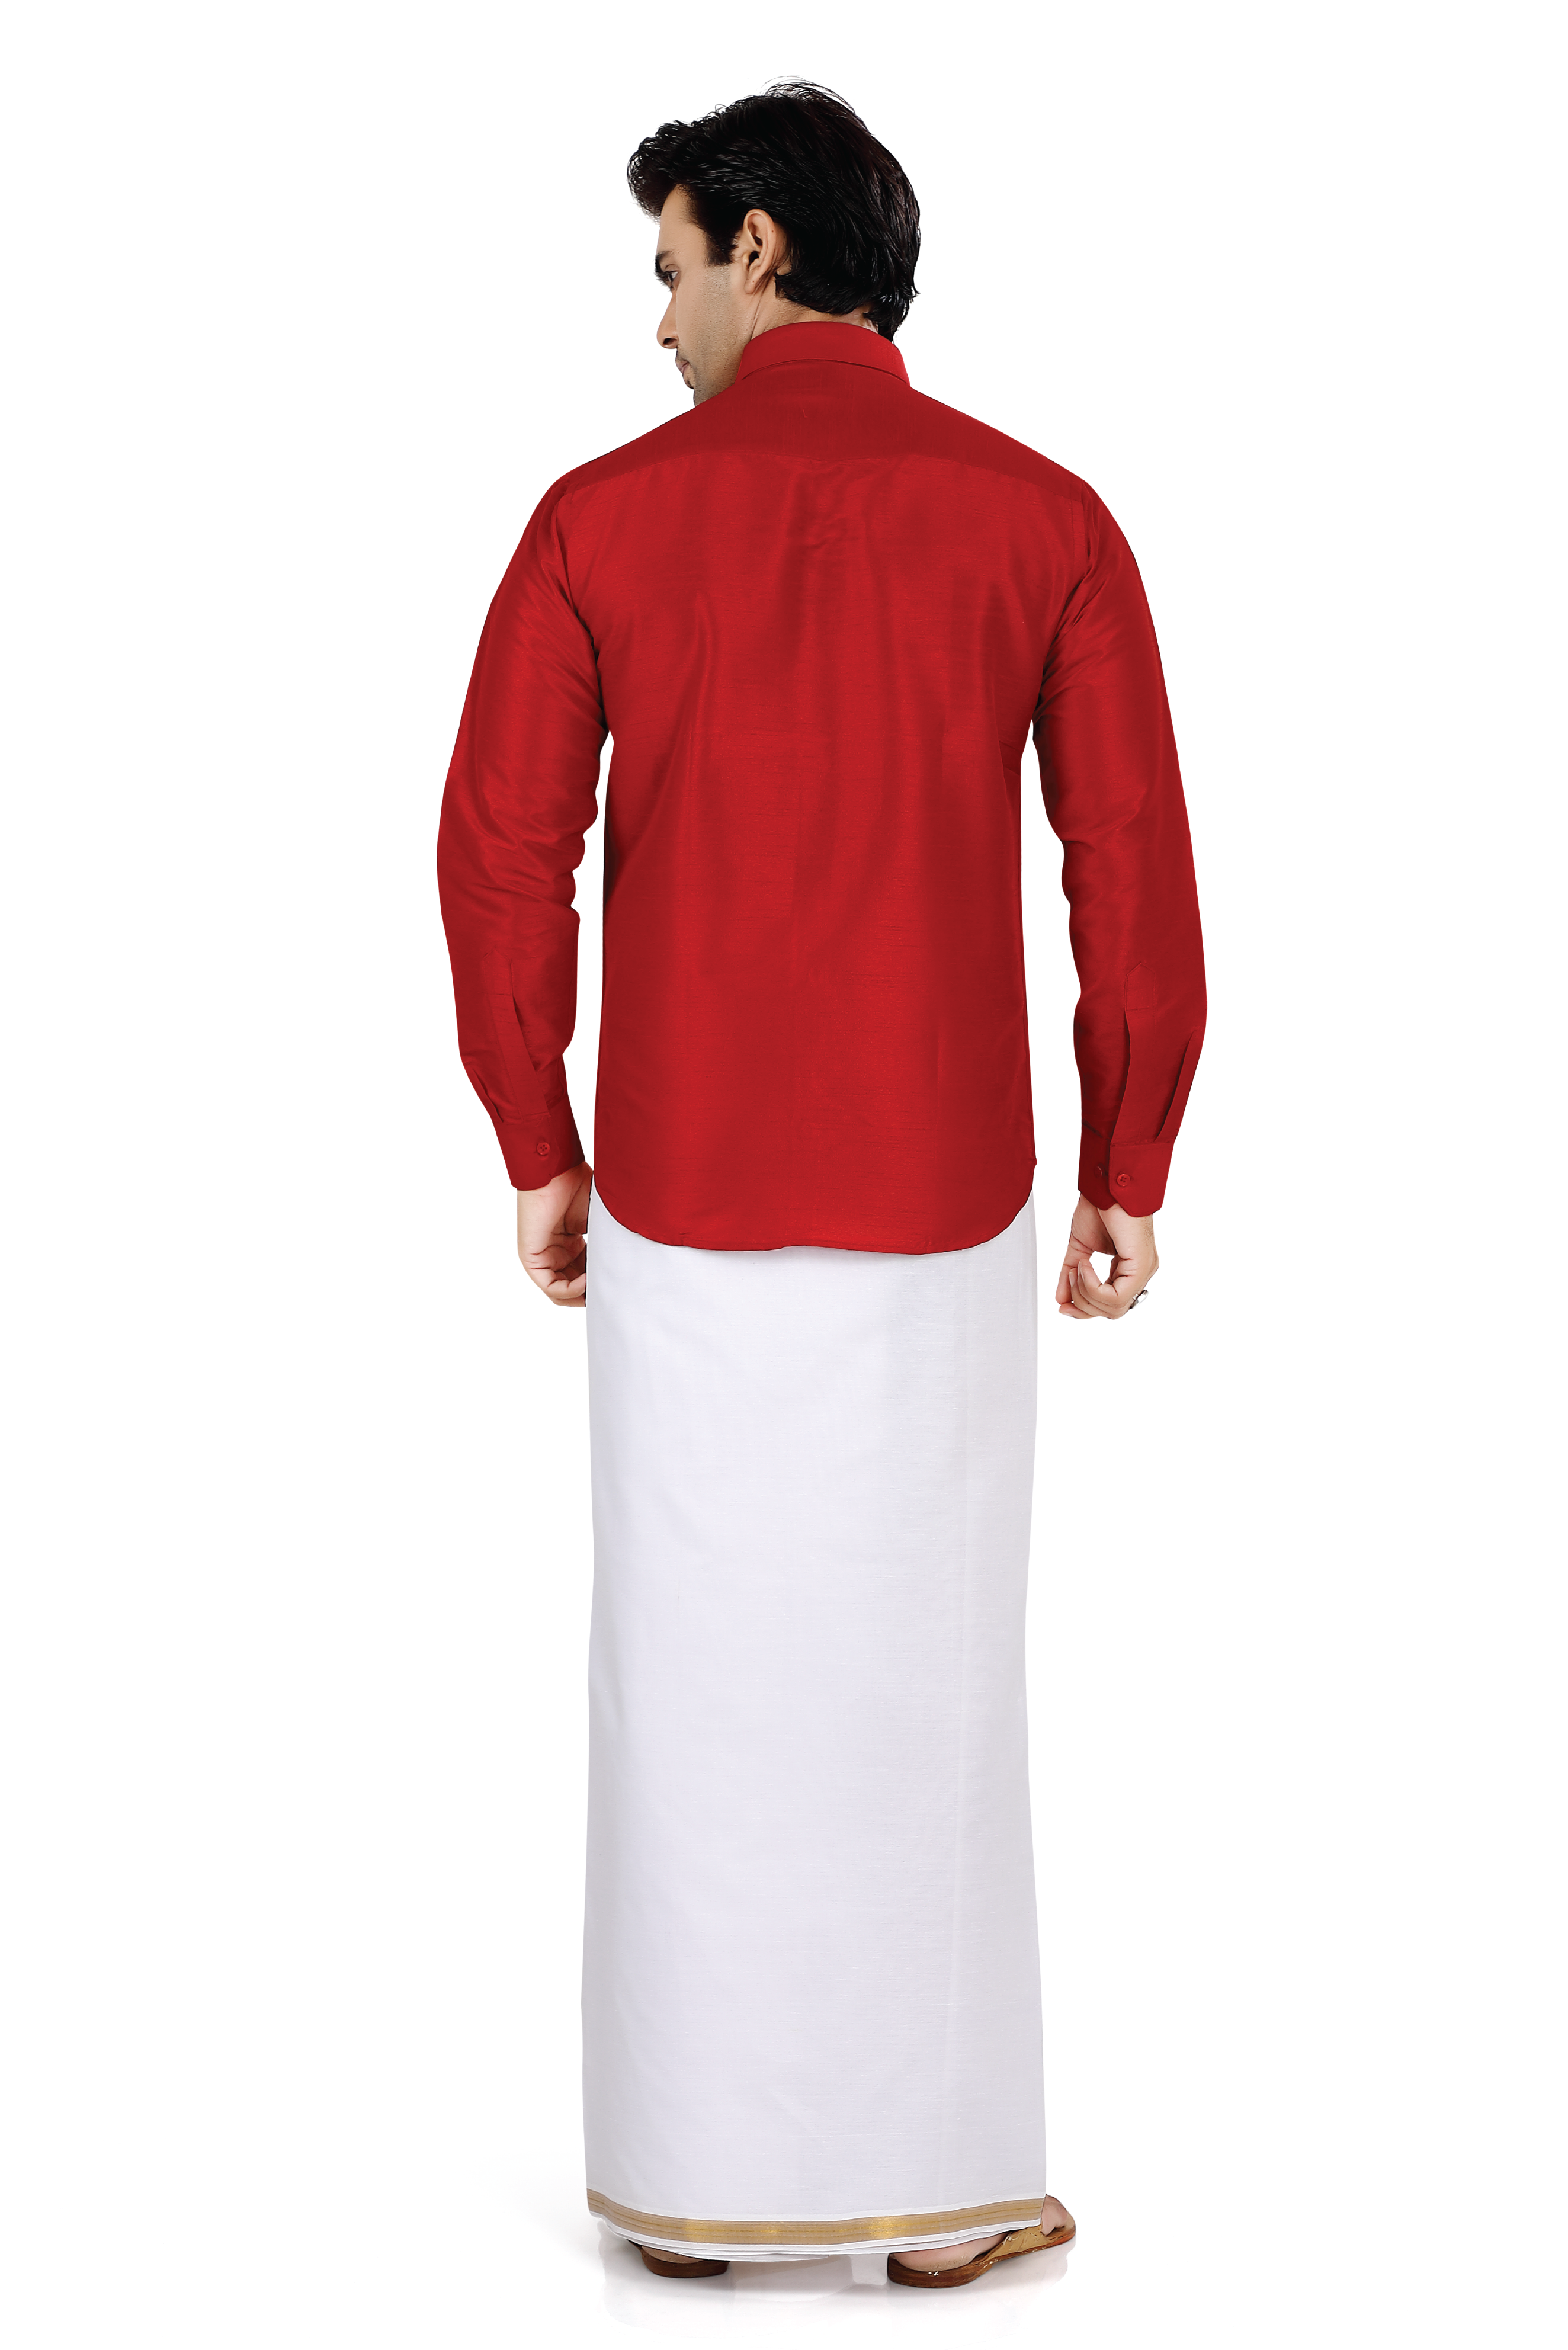 Dupion Silk Shirt in Red Full sleeves with Cotton Dhoti